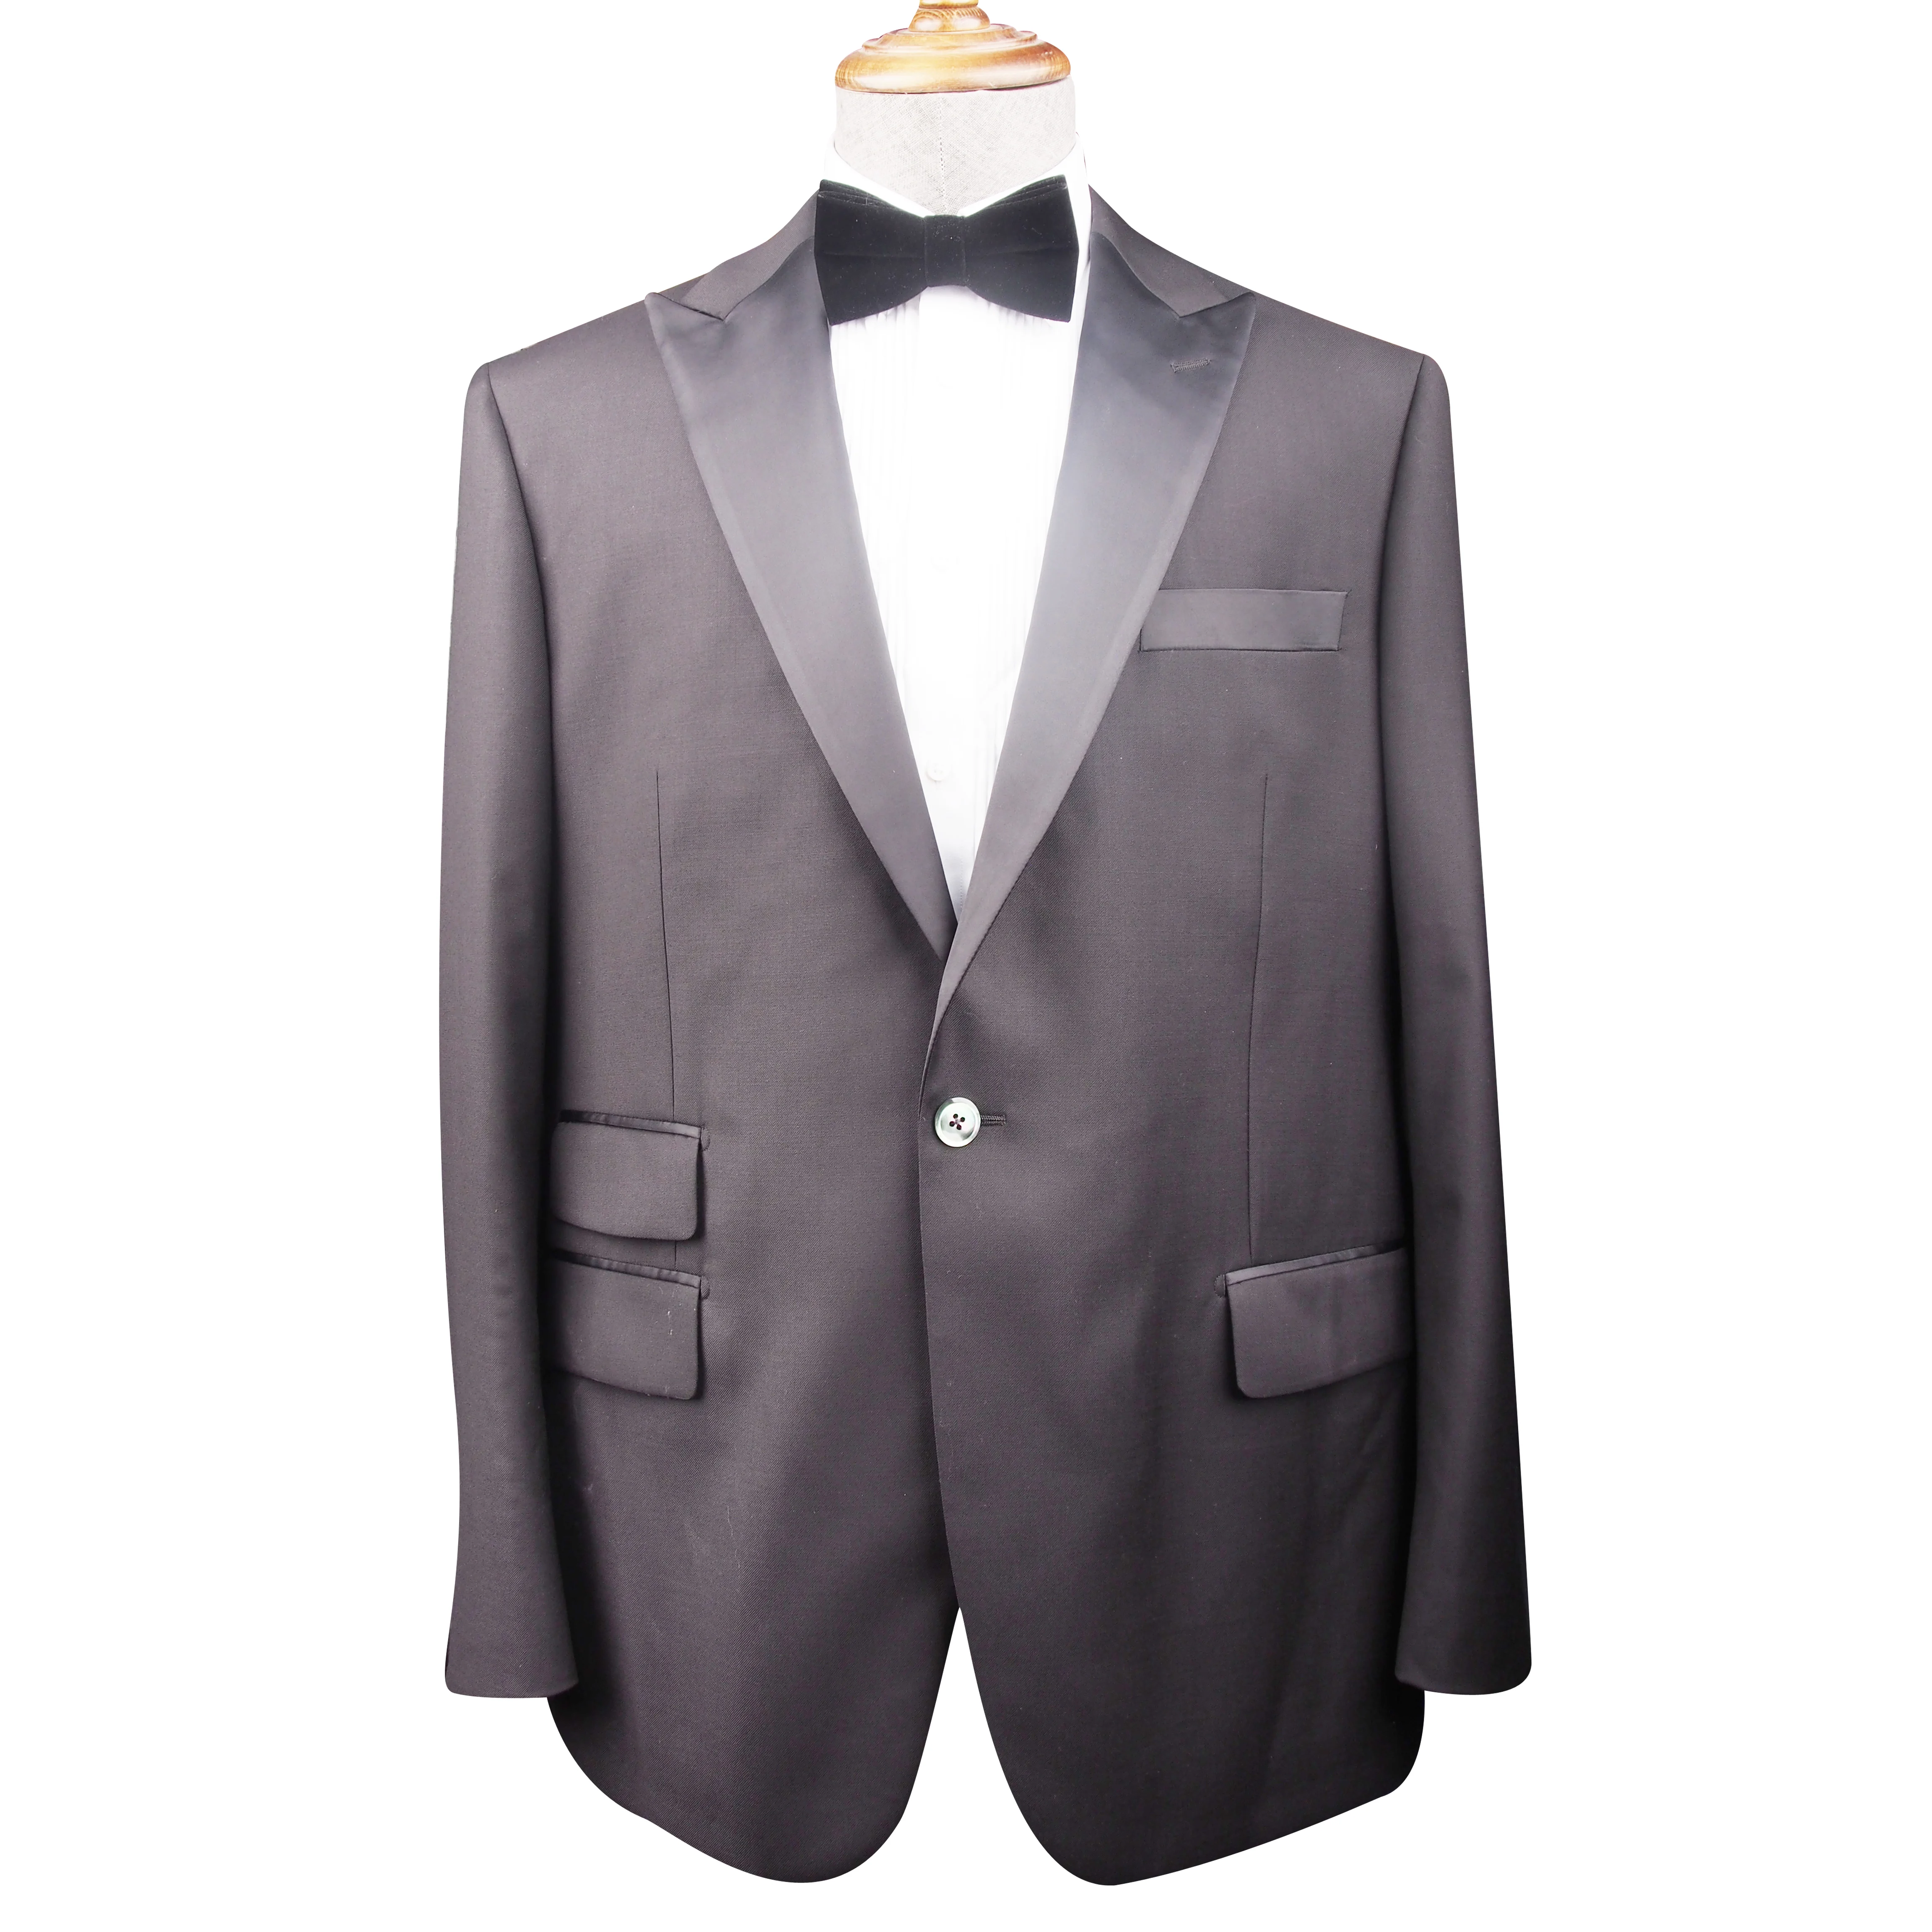 made in China wholesale 2 pièces 100% Wool  Tuxedo Suit modern men's suit